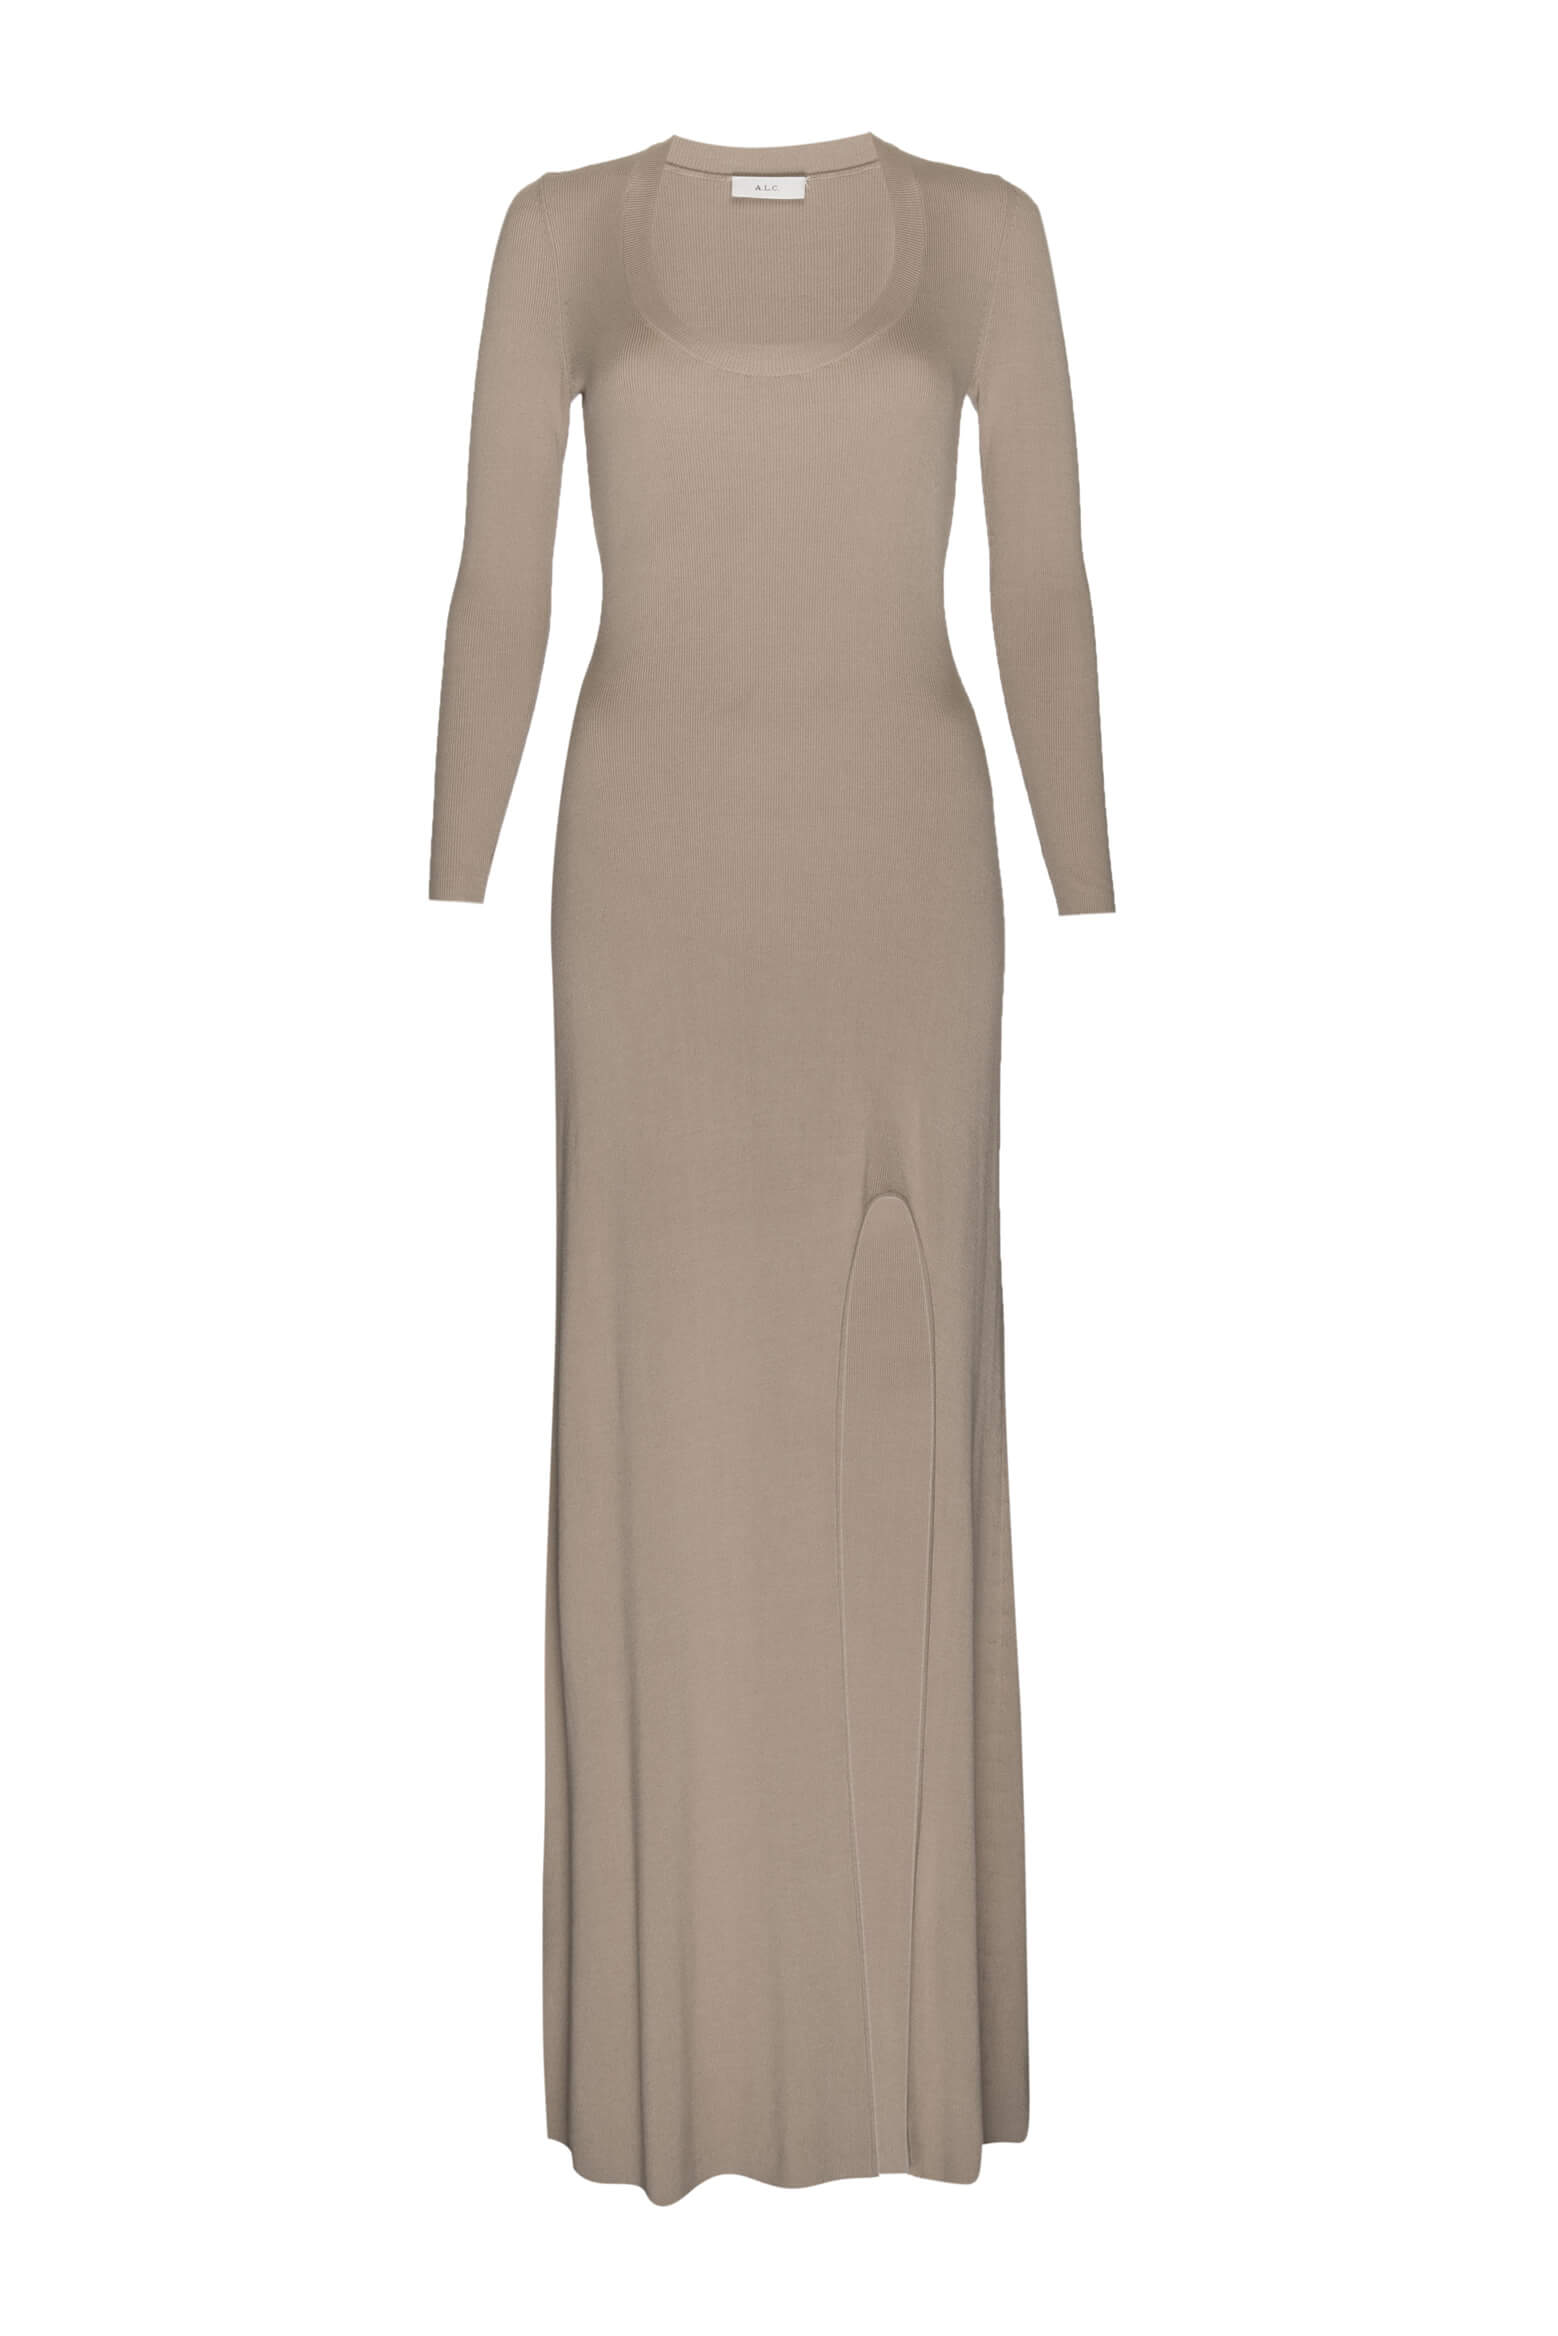 A.L.C Akita Dress available at The New Trend